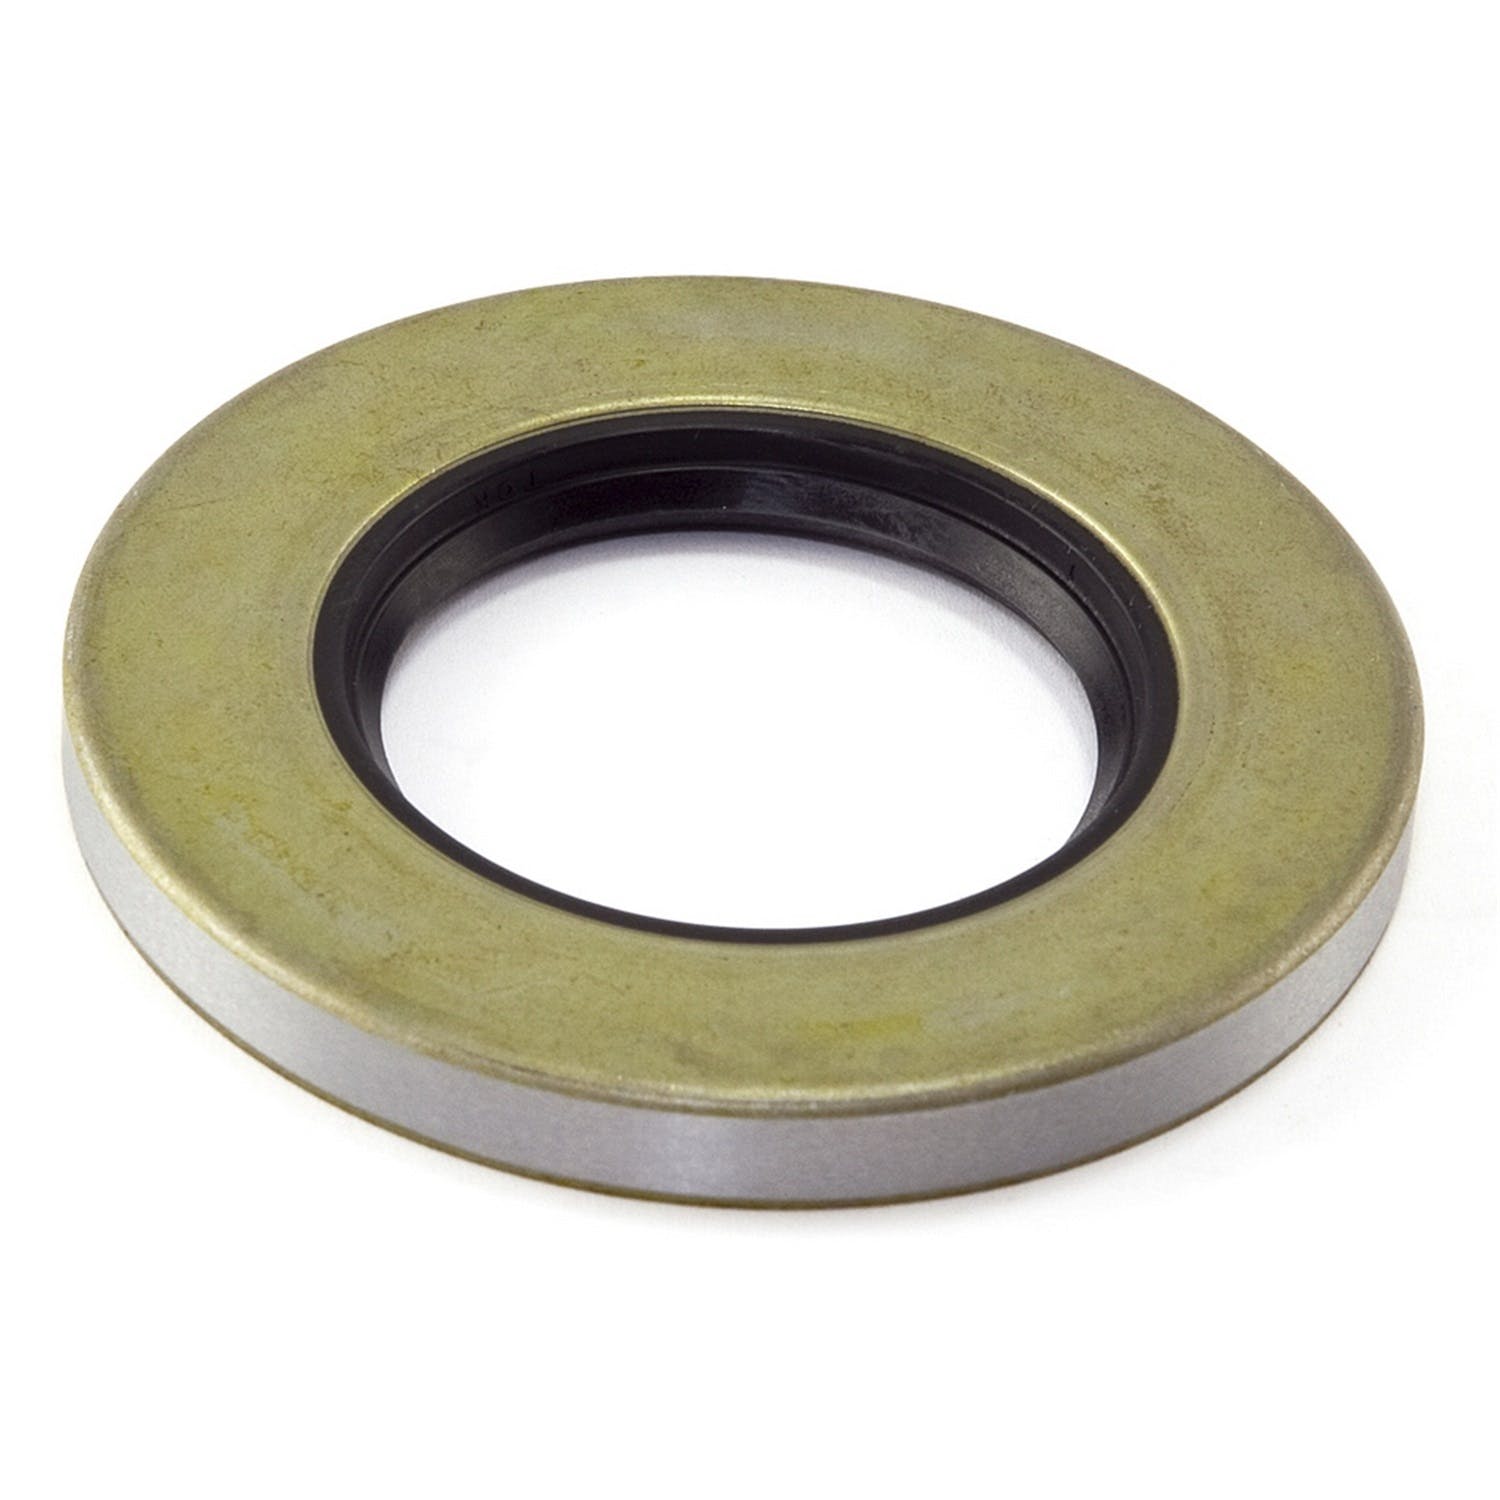 Omix-ADA 18883.04 T150 Rear Bearing Retainer Oil Seal